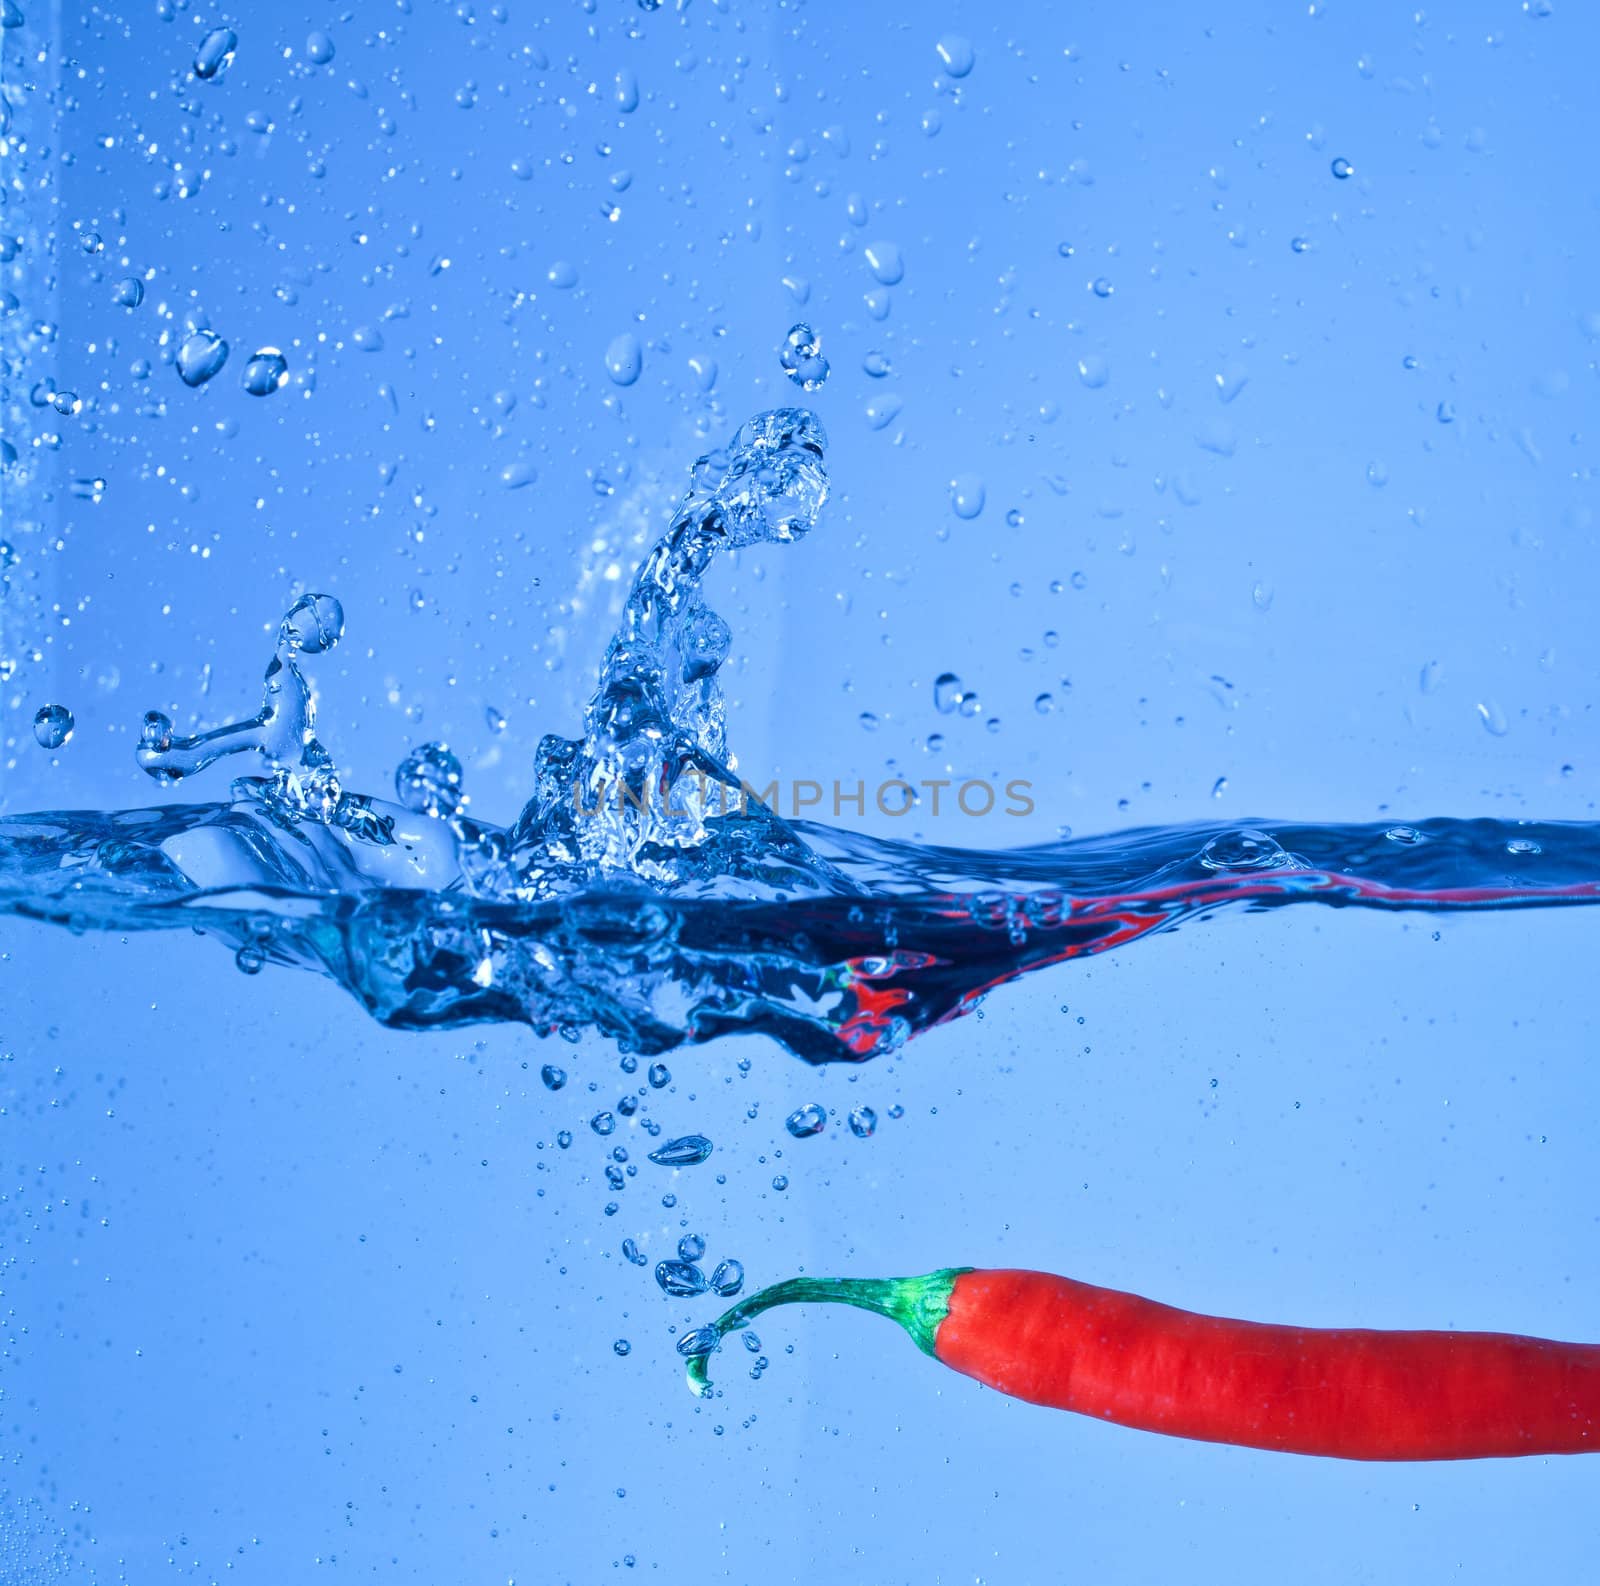 red pepper dropped into water with splash on blue